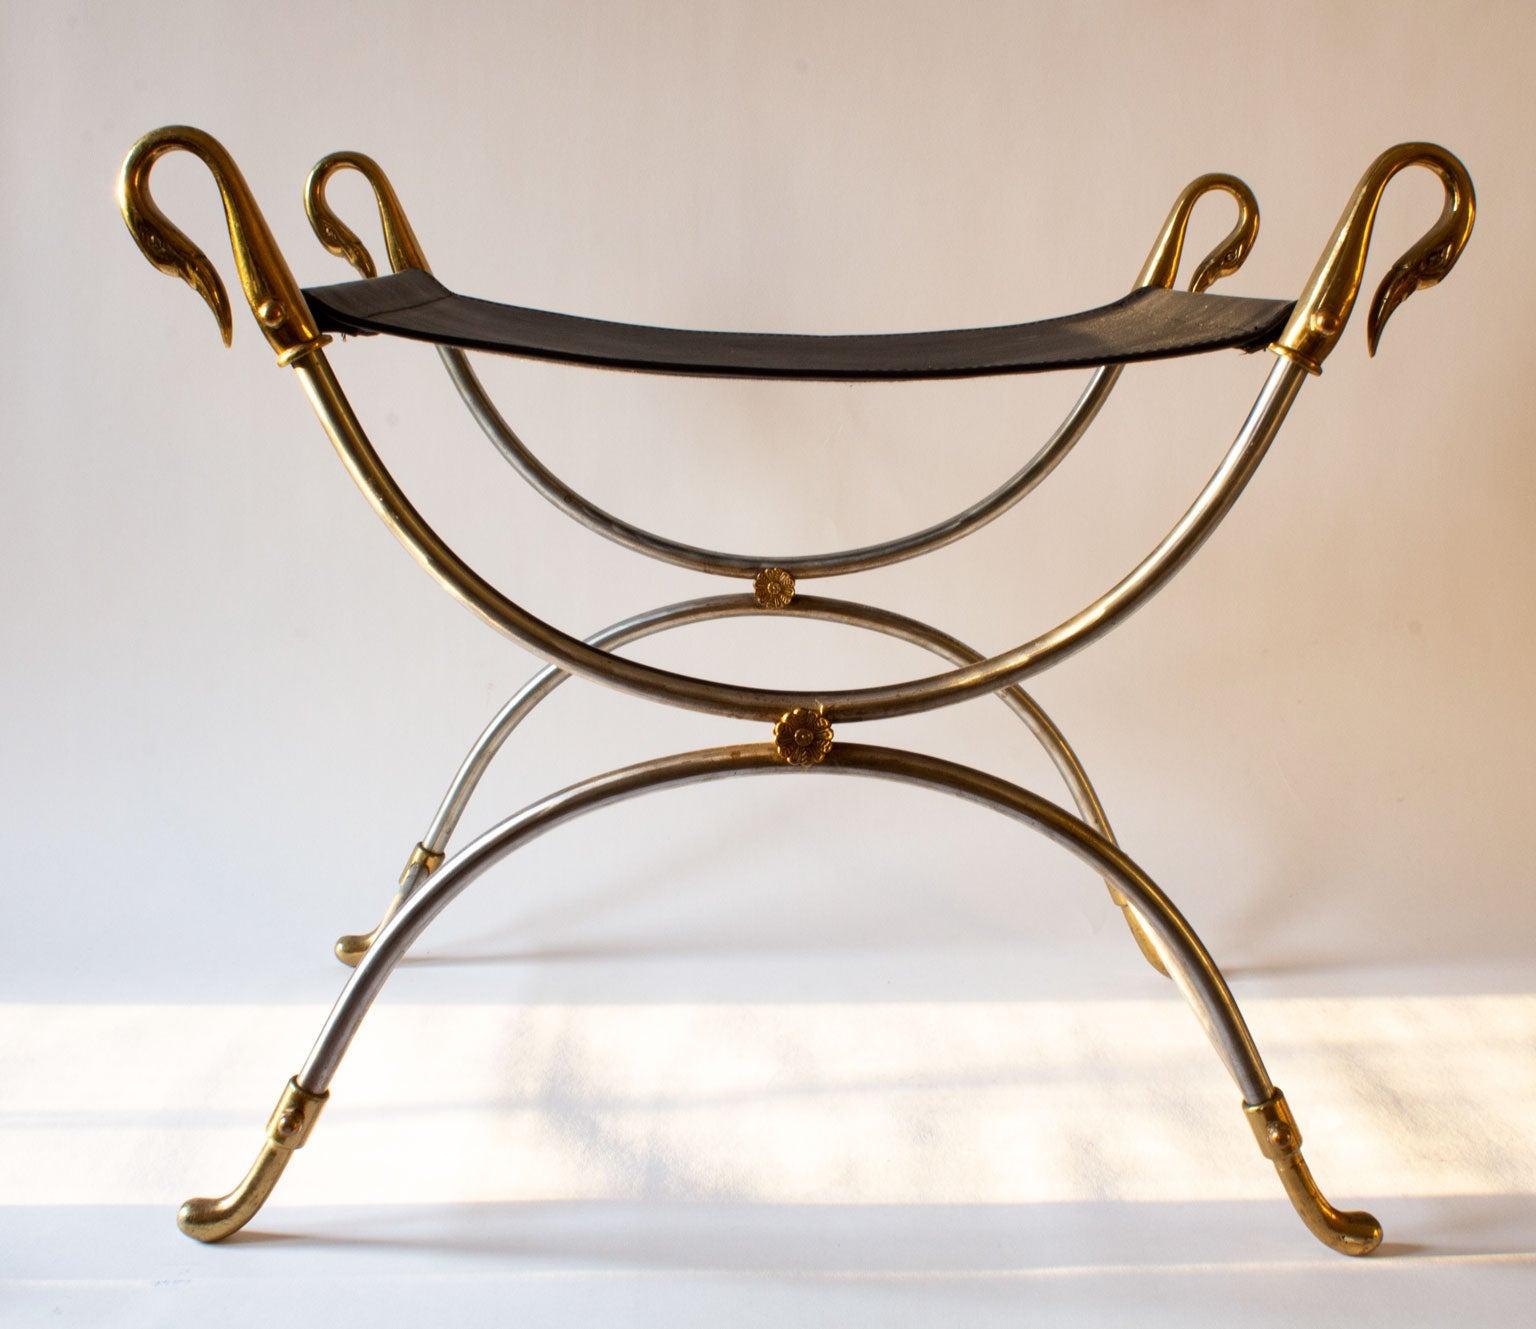 Elegant and stylish leather stool with Swan heads in brass by Maison Jansen, made in France in the 1970s. New leather seat with a frame in brushed steel. The pieces feature a classical Curile leg structure which supports a shaped seat for comfort.